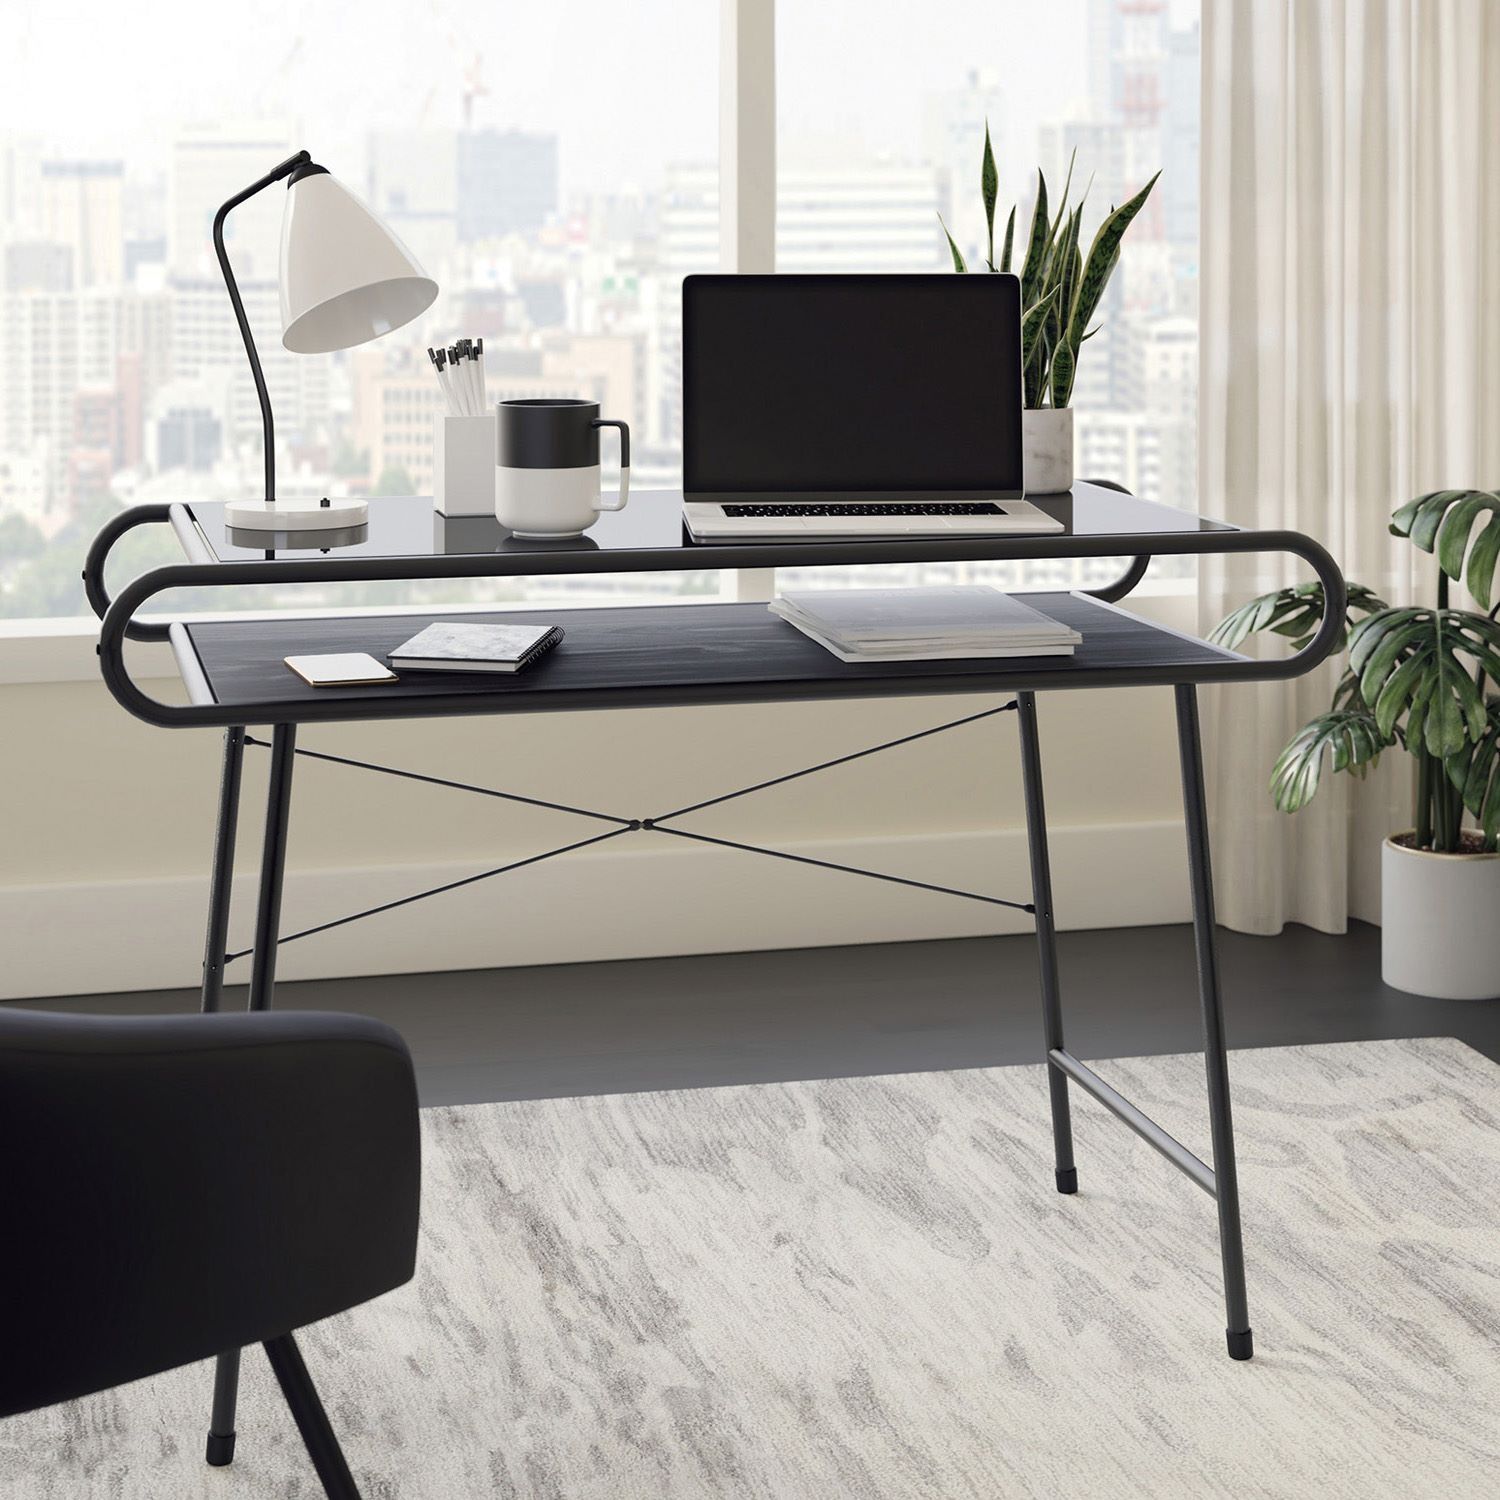 Realm Home Office Glass Laptop Desk | Free Uk Delivery With Regard To Glass And Chrome Modern Computer Office Desks (View 6 of 15)